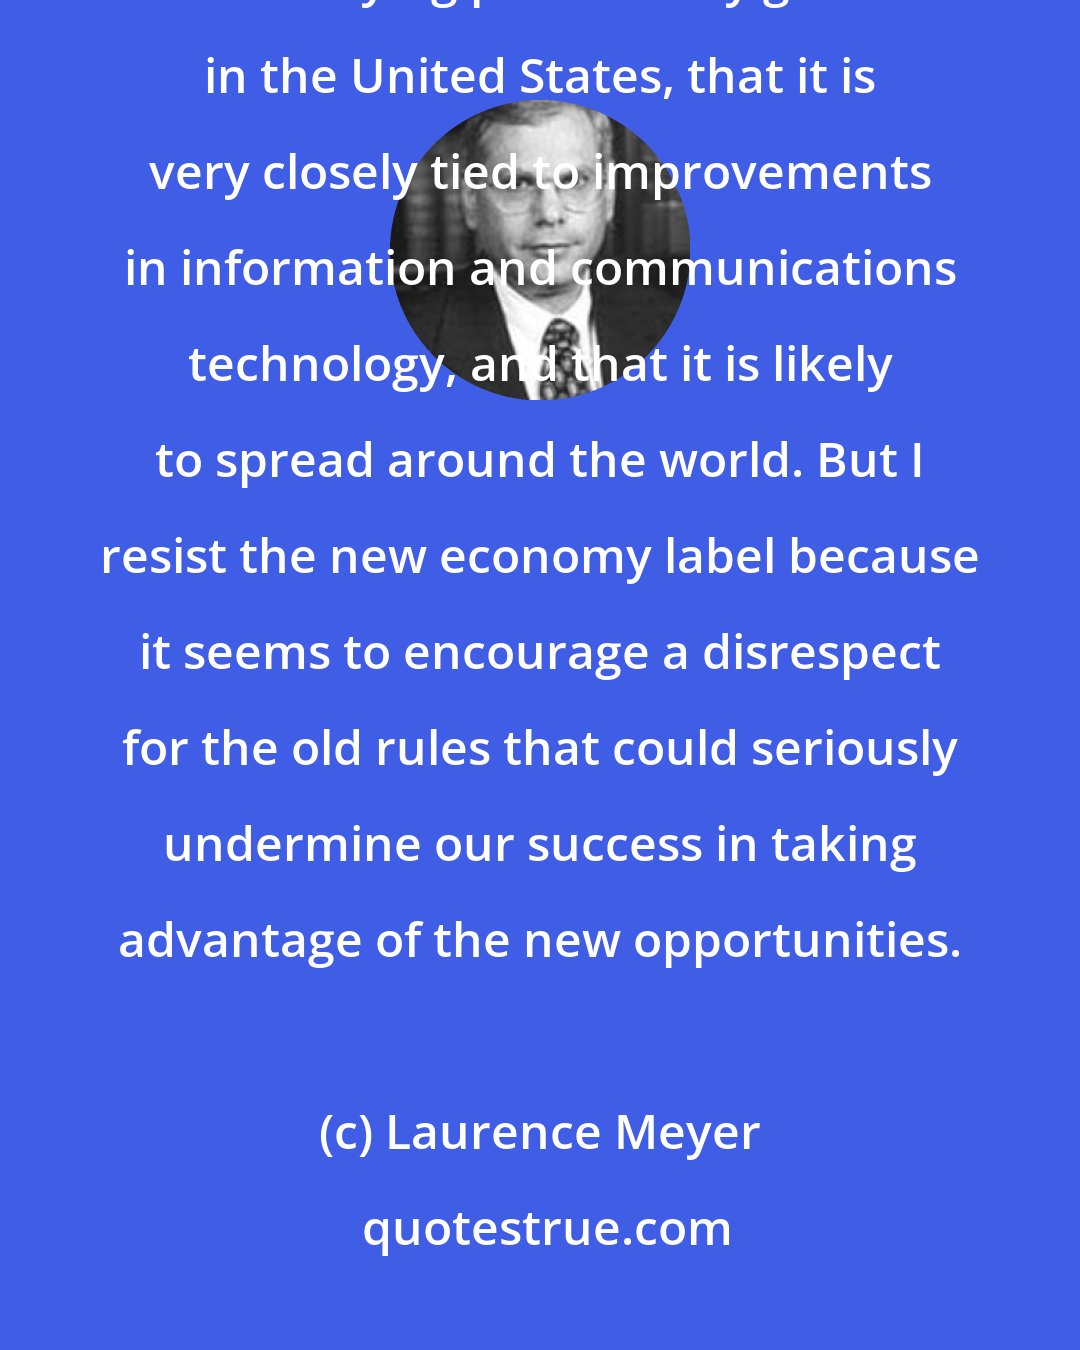 Laurence Meyer: I accept the proposition that there has been a significant improvement in underlying productivity growth in the United States, that it is very closely tied to improvements in information and communications technology, and that it is likely to spread around the world. But I resist the new economy label because it seems to encourage a disrespect for the old rules that could seriously undermine our success in taking advantage of the new opportunities.